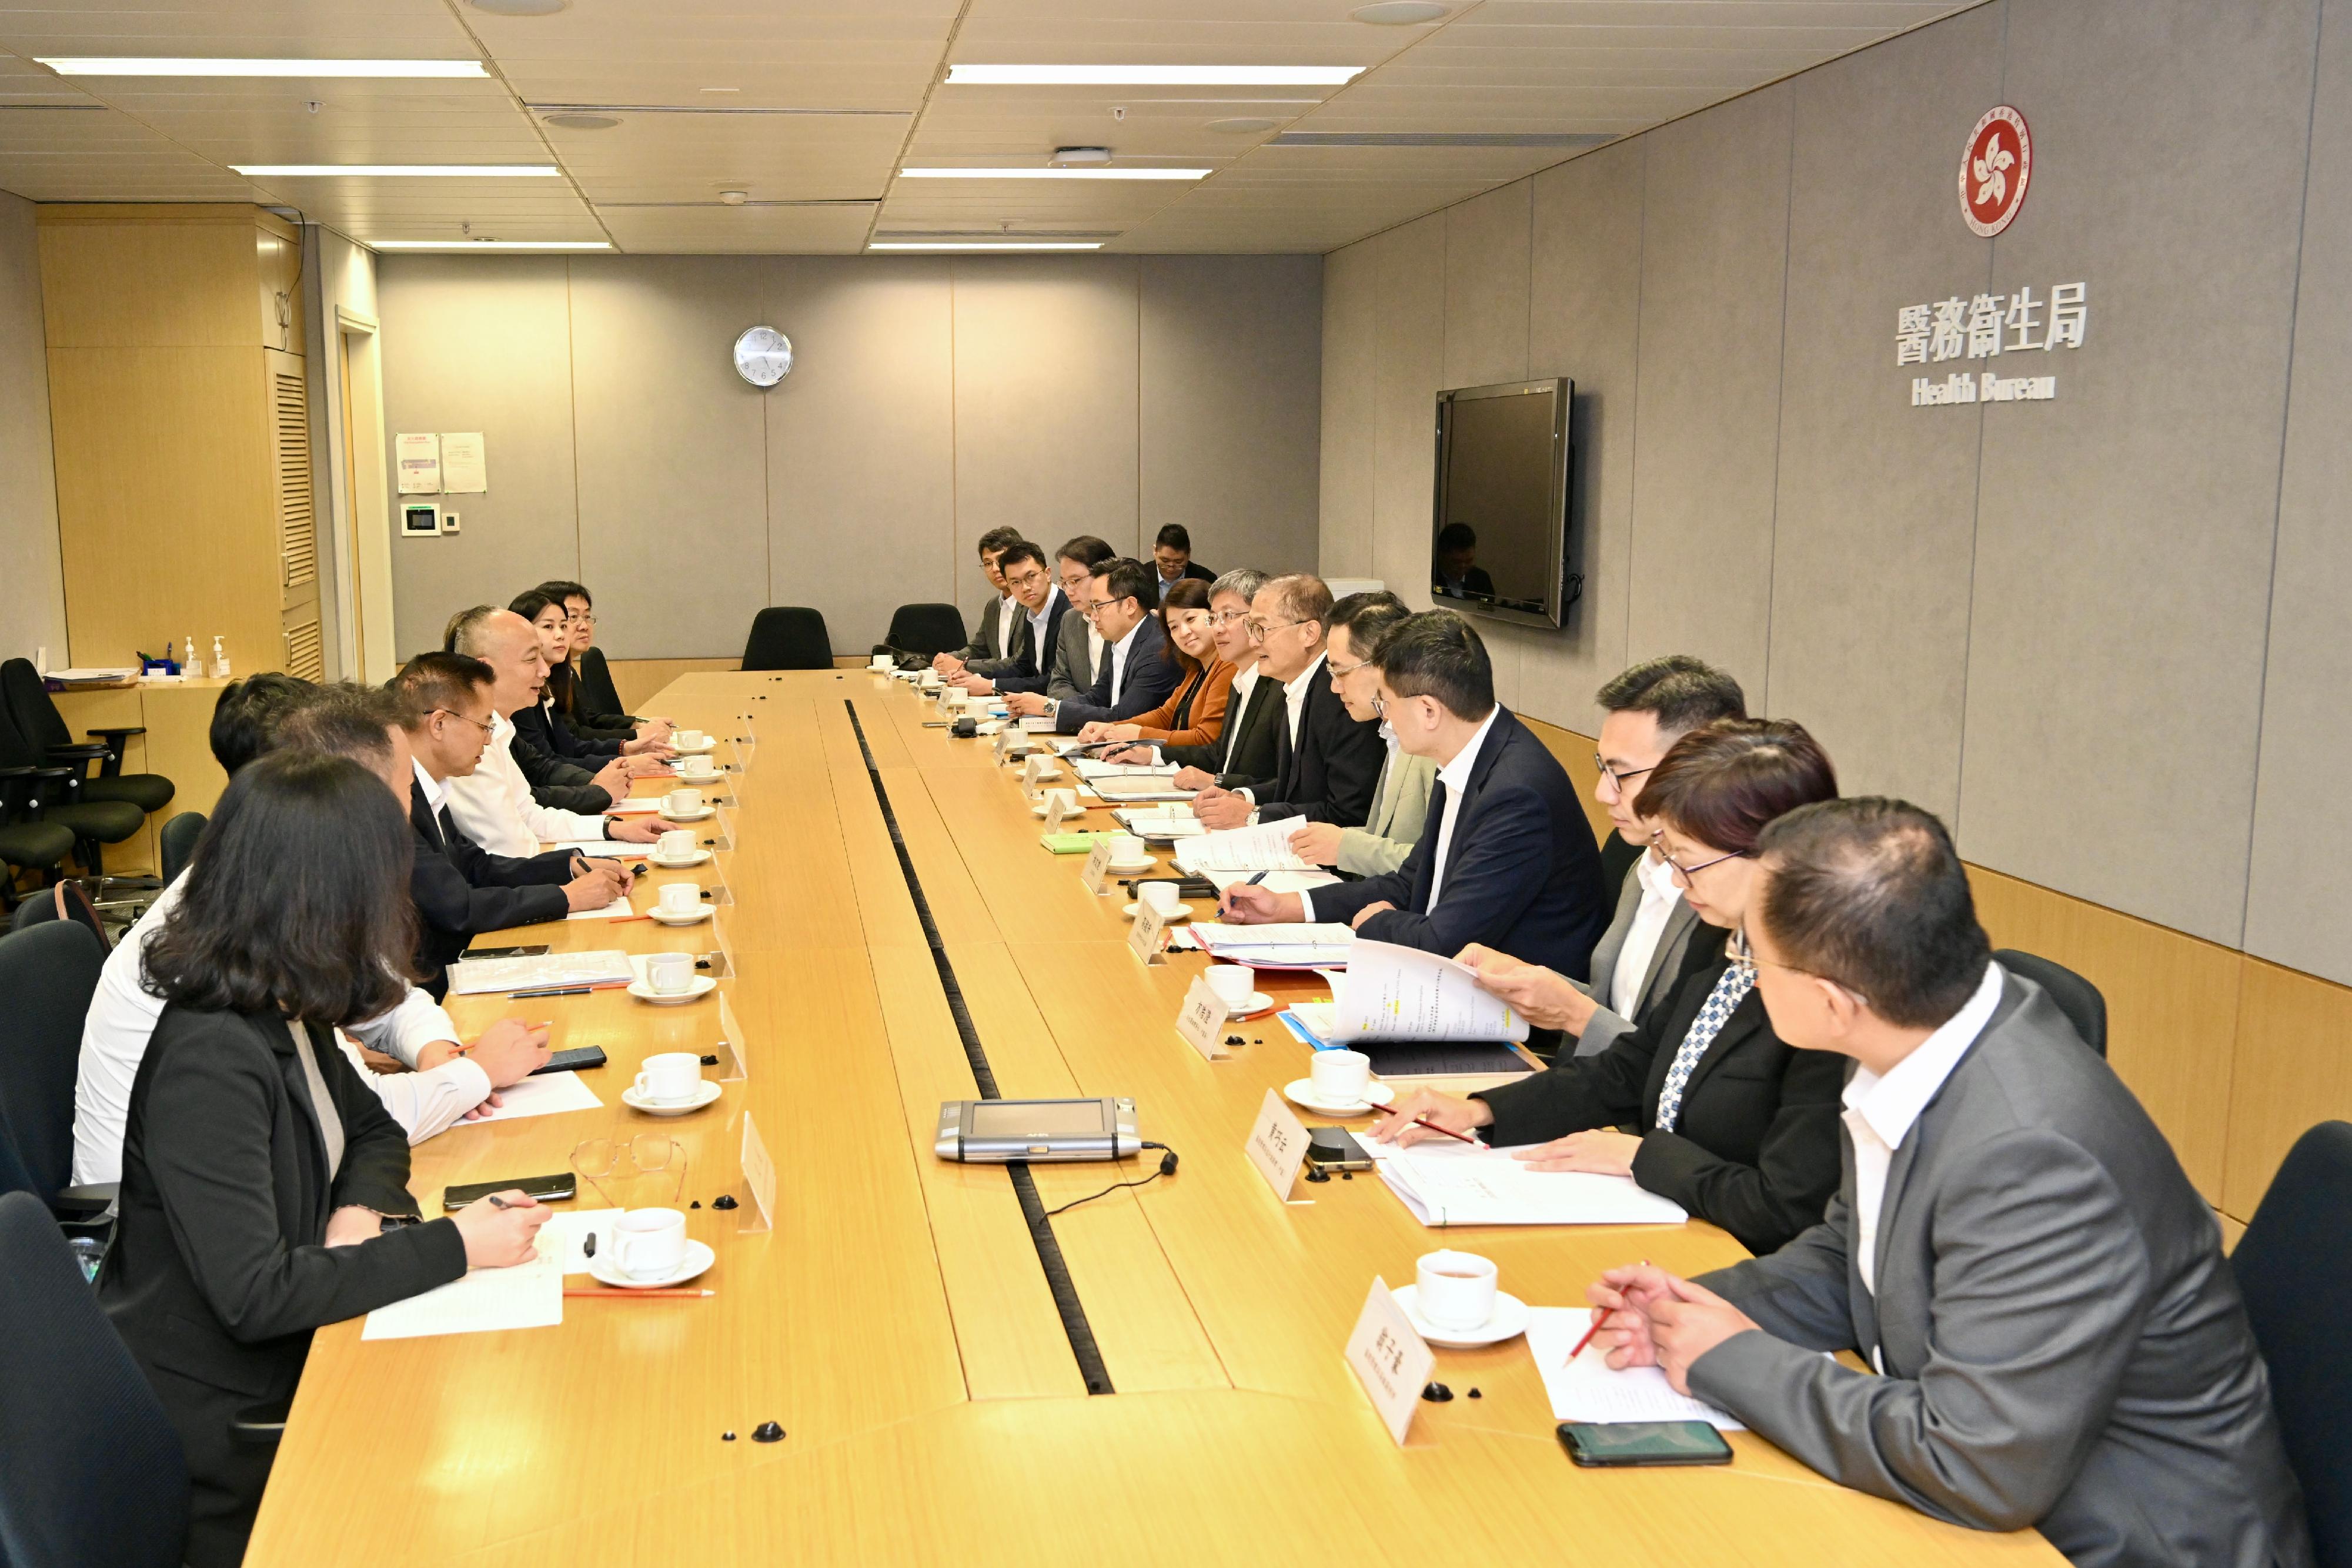 The Secretary for Health, Professor Lo Chung-mau (sixth right), meets with a delegation led by the Director of Sichuan Provincial Administration of Traditional Chinese Medicine, Mr Tian Xingjun (fifth left), today (October 30). The Permanent Secretary for Health, Mr Thomas Chan (seventh right); the Under Secretary for Health, Dr Libby Lee (eighth right); the Director of Health, Dr Ronald Lam (fifth right); and the Chief Executive of the Hospital Authority, Dr Tony Ko (fourth right), also attend.